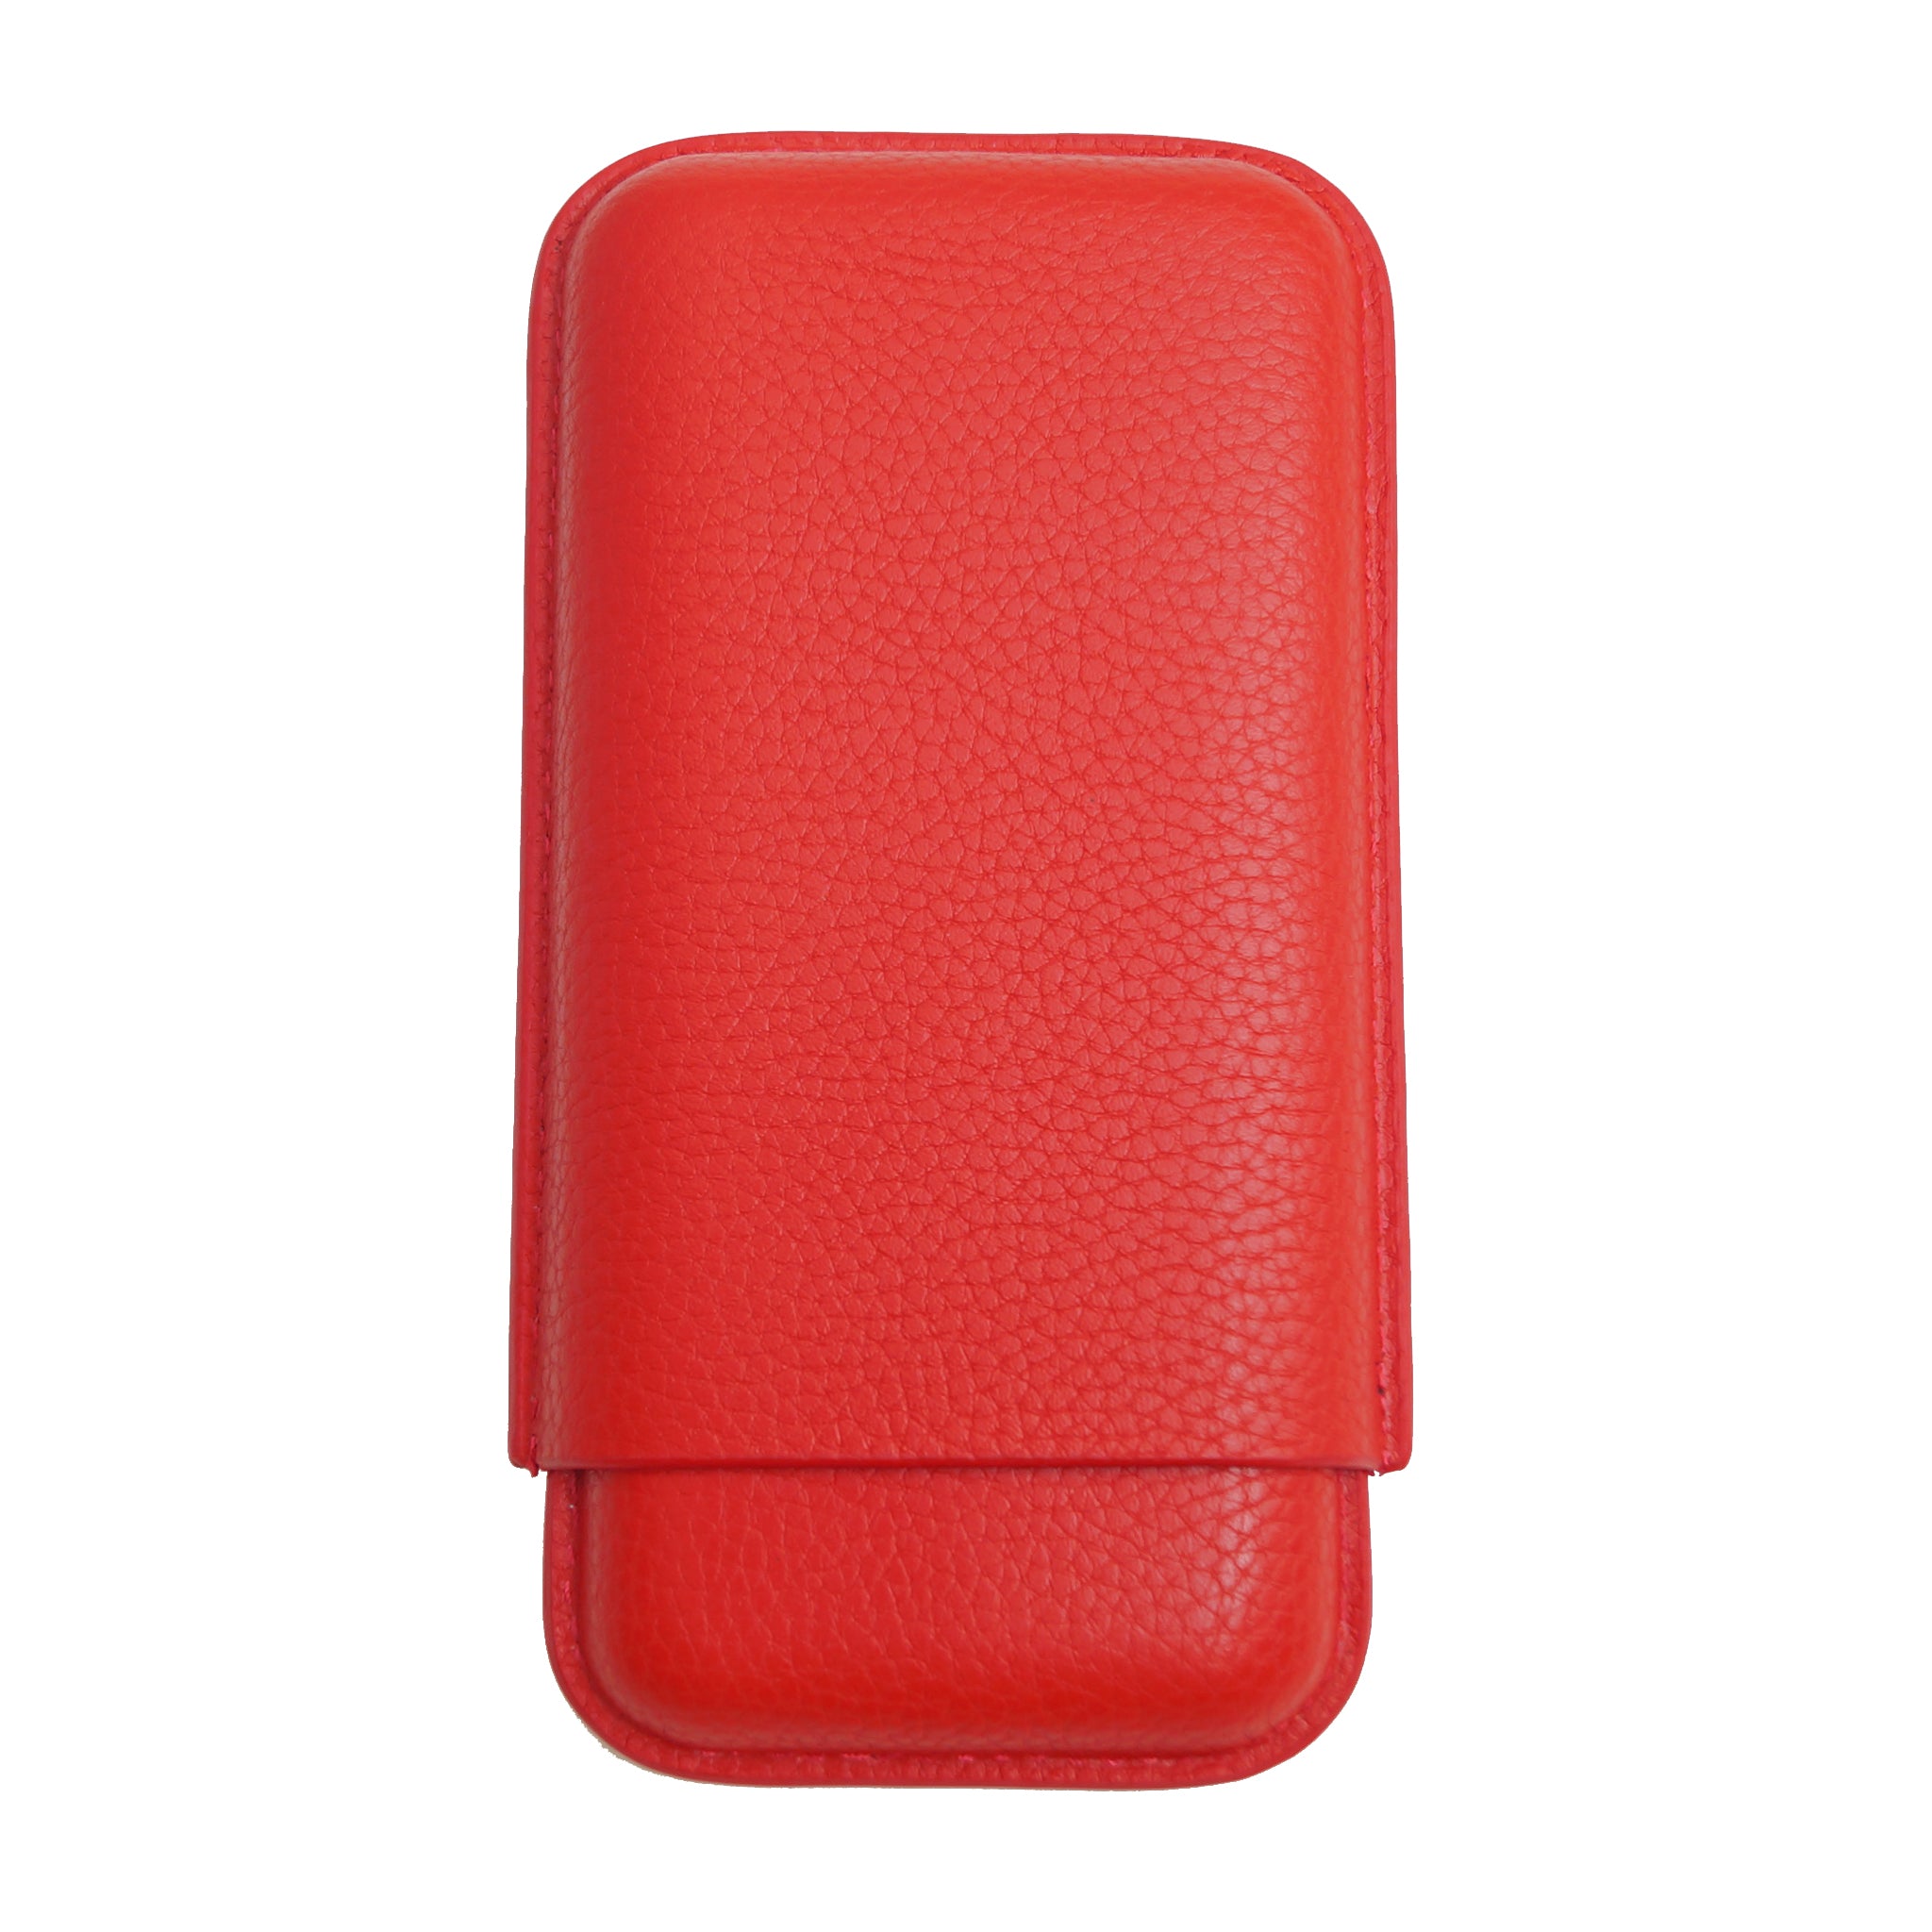 RED LEATHER CIGAR POUCH - VSB London